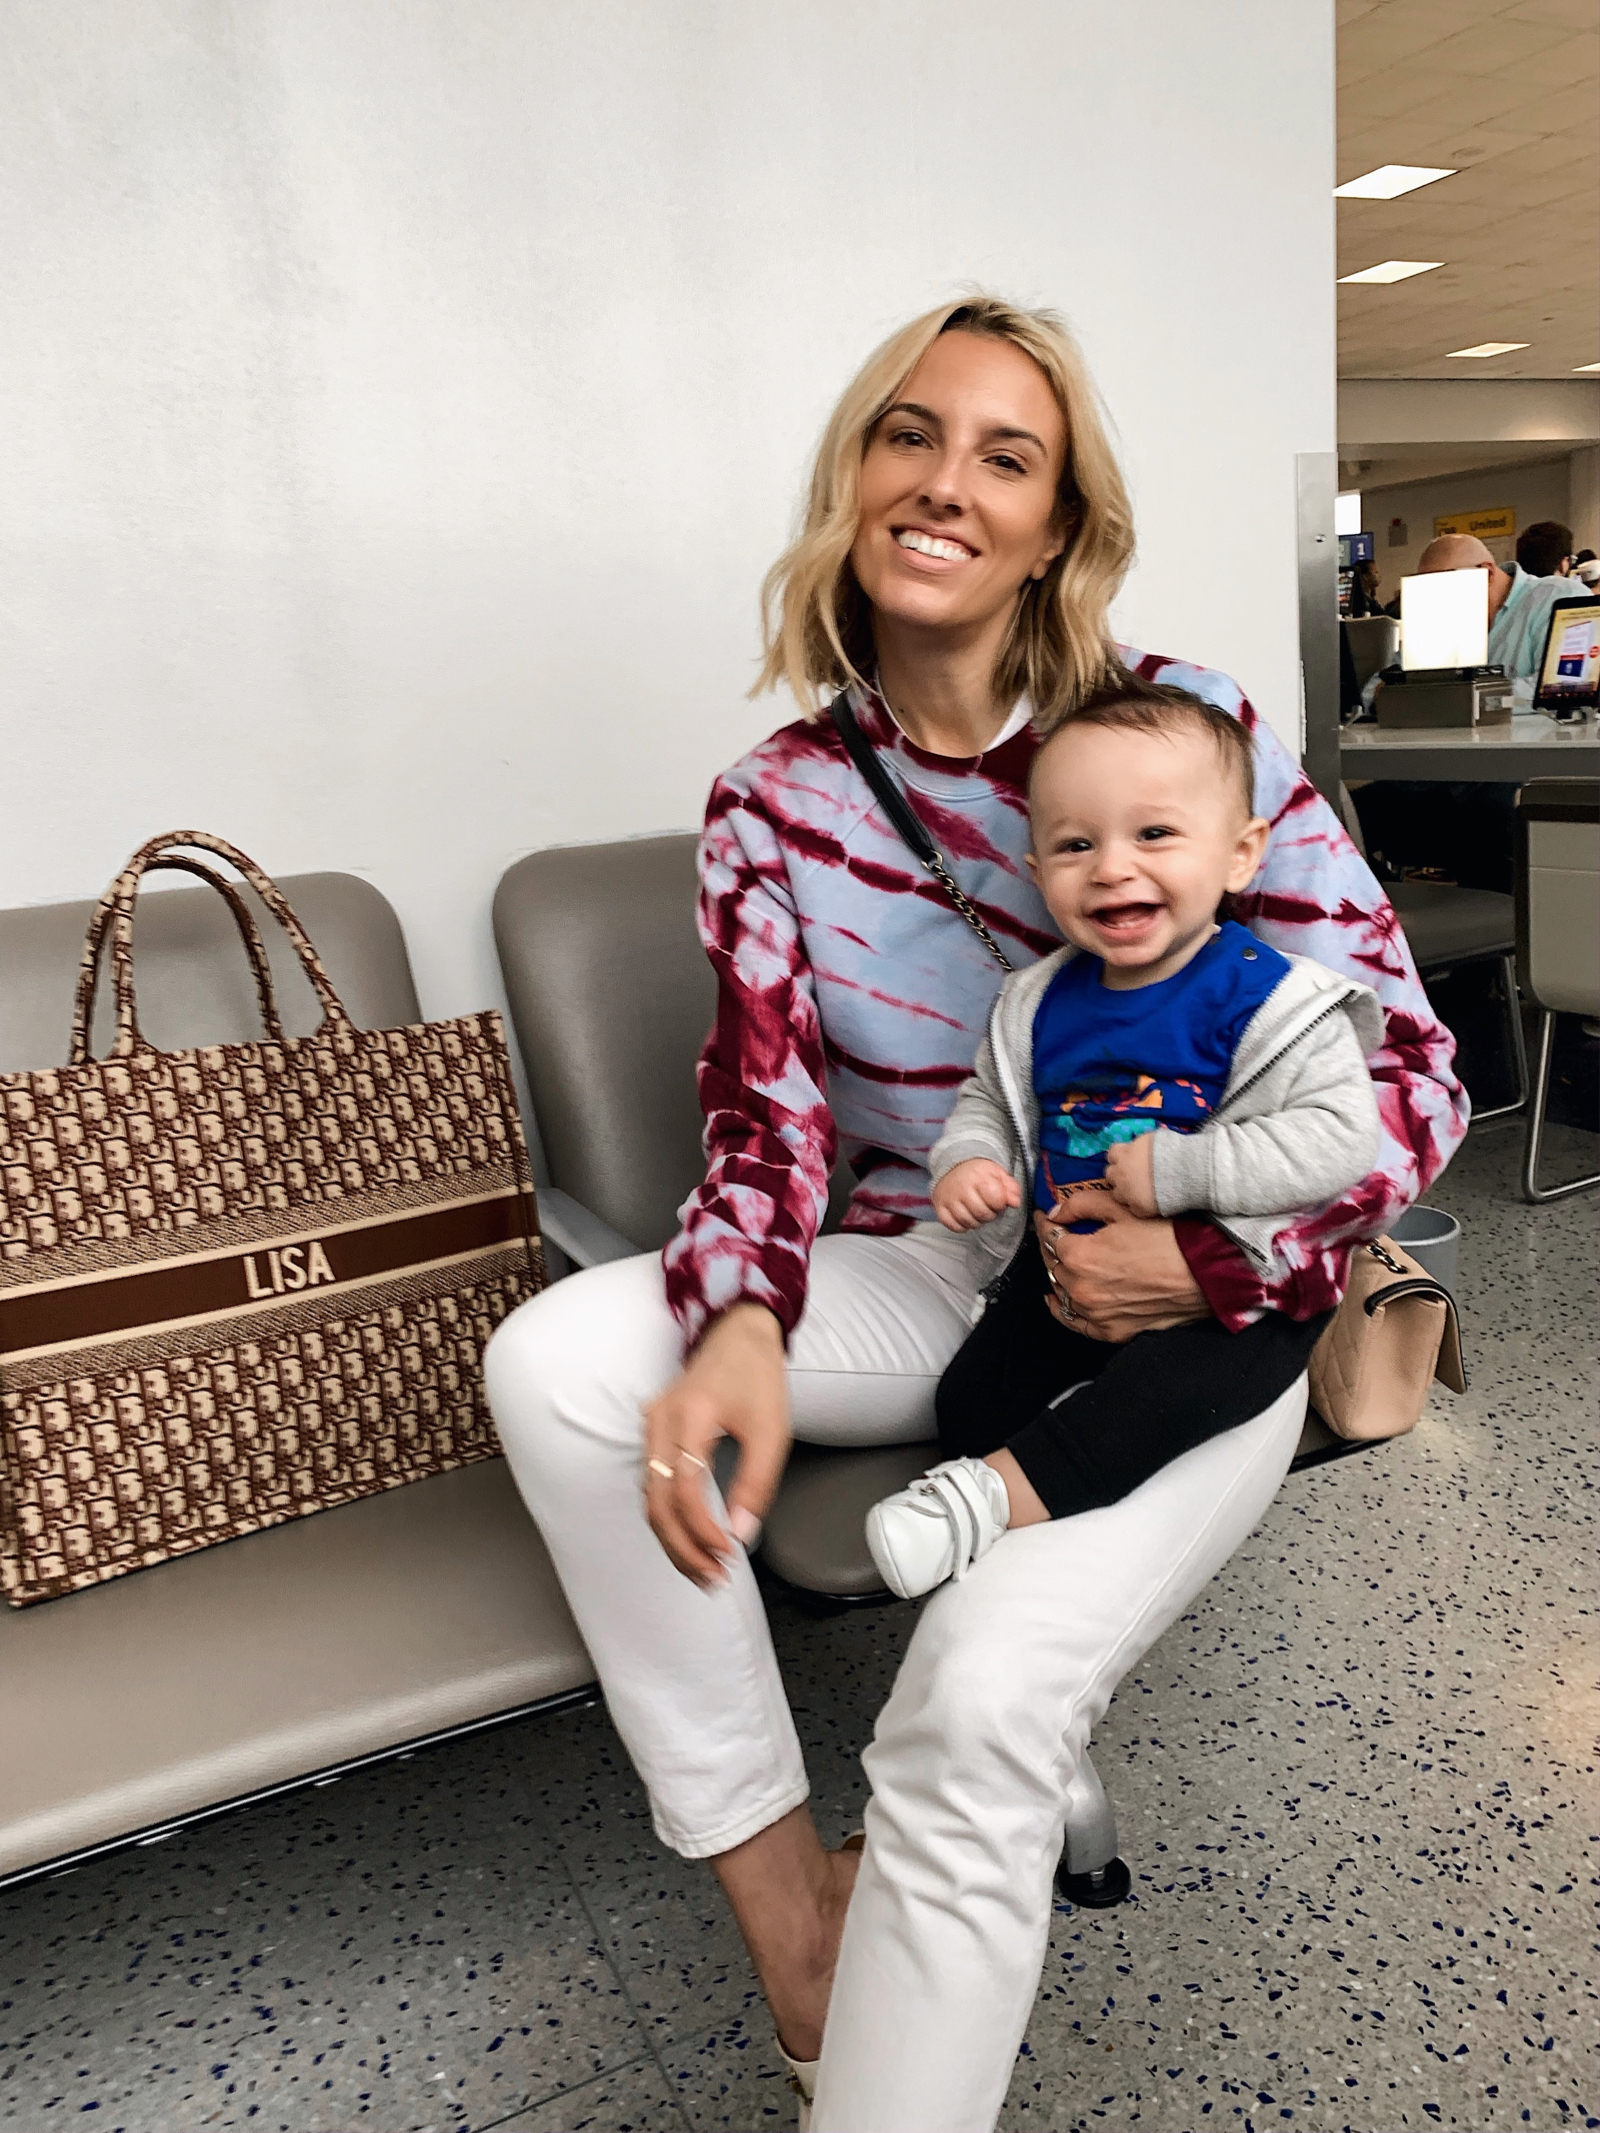 airport outfit, tie dye trend, Baby and mom, Family vacation